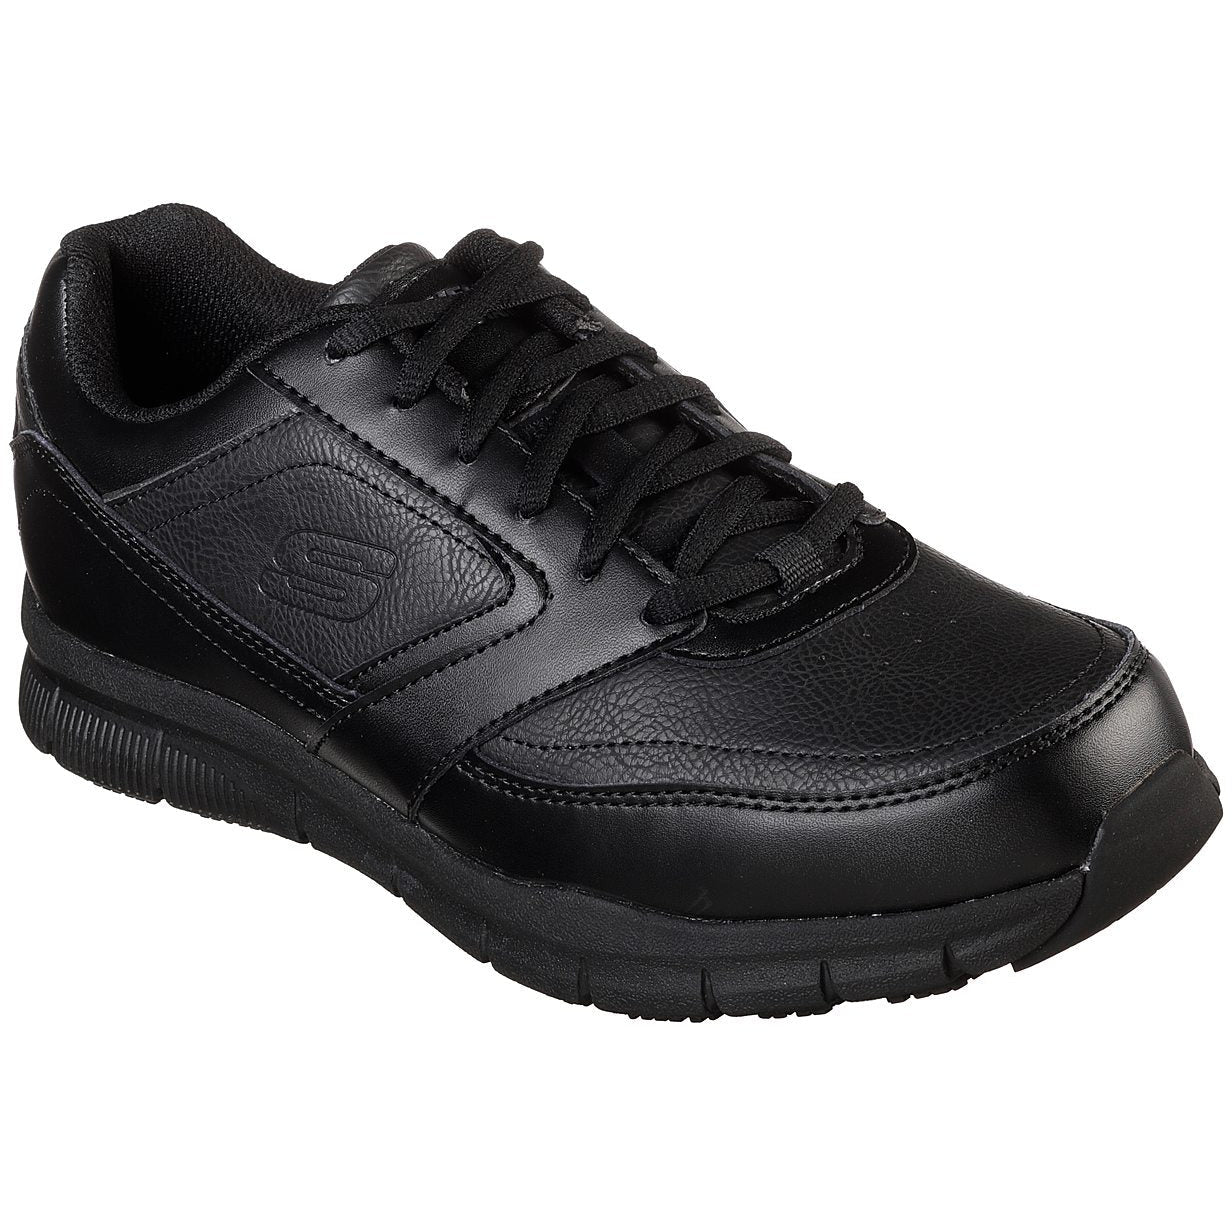 CHAUSSURE SKECHERS NAMPA HOMME